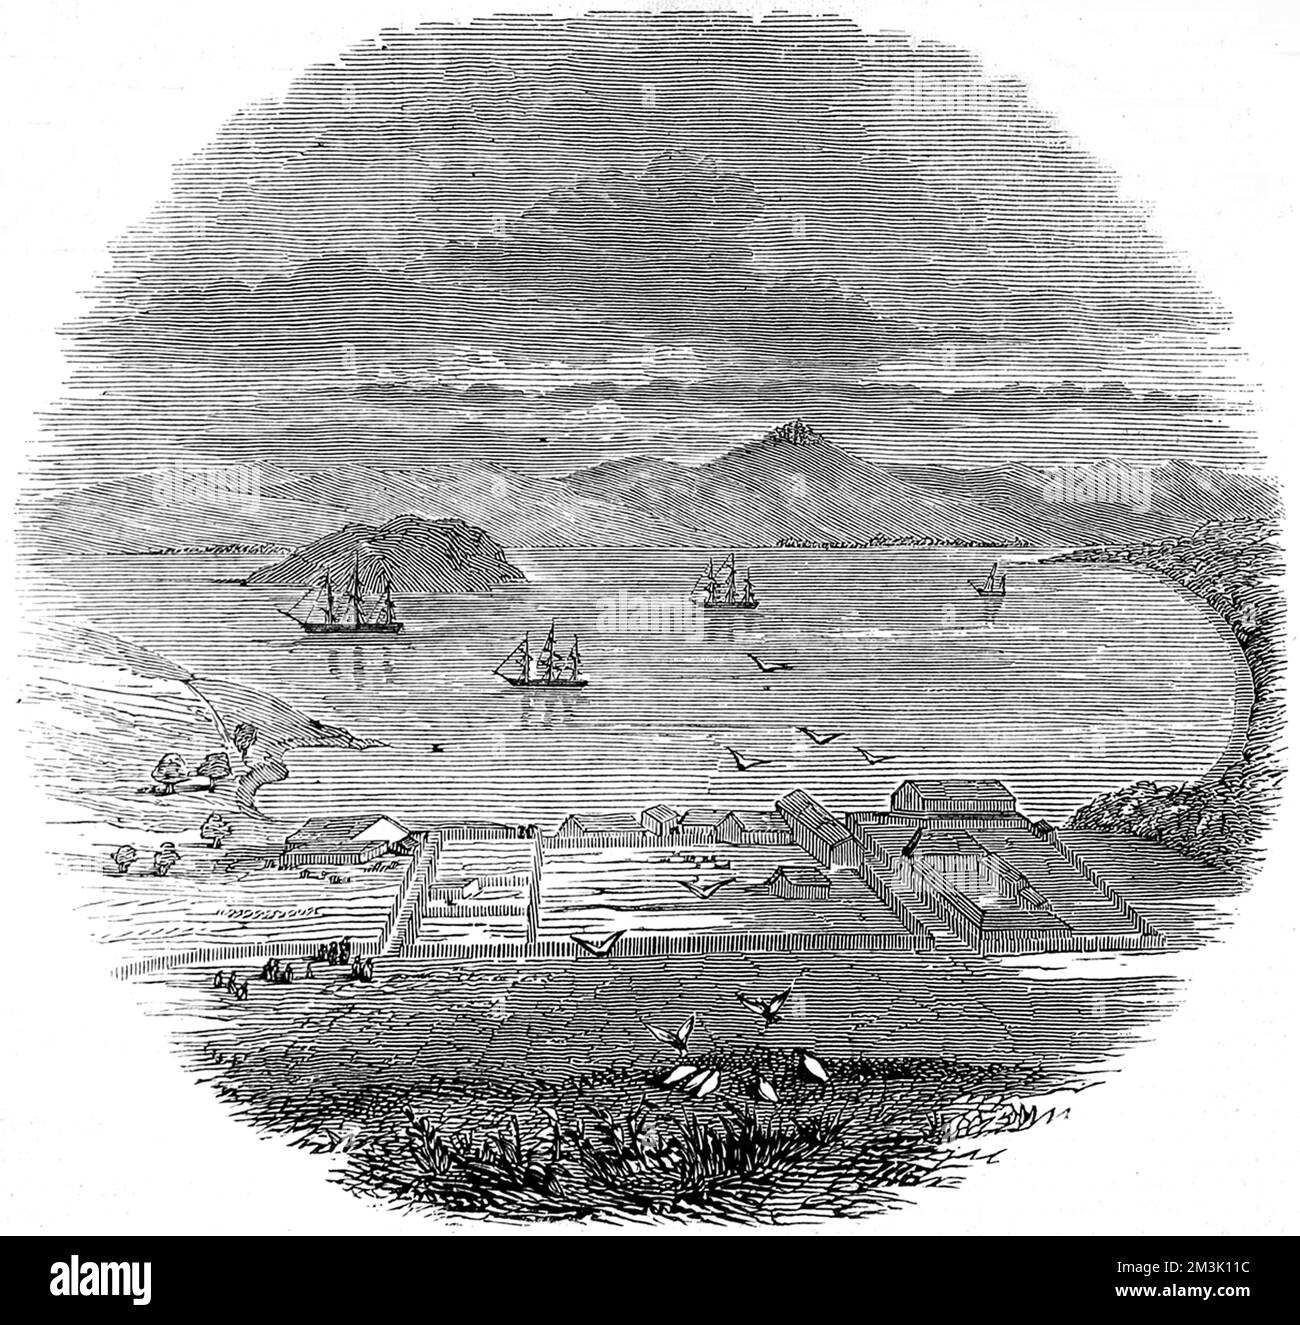 The anchorage at Yerba Buena in the bay of San Francisco, Alta-California, with several ships and sea birds, 1846.   There were five missionary establishments there at this time, named the missions of Dolores, Santa Clara, St Jose, St Francisco Solano and St Raphael. The missions had a population of 500 American Indians and 200 white people. Stock Photo